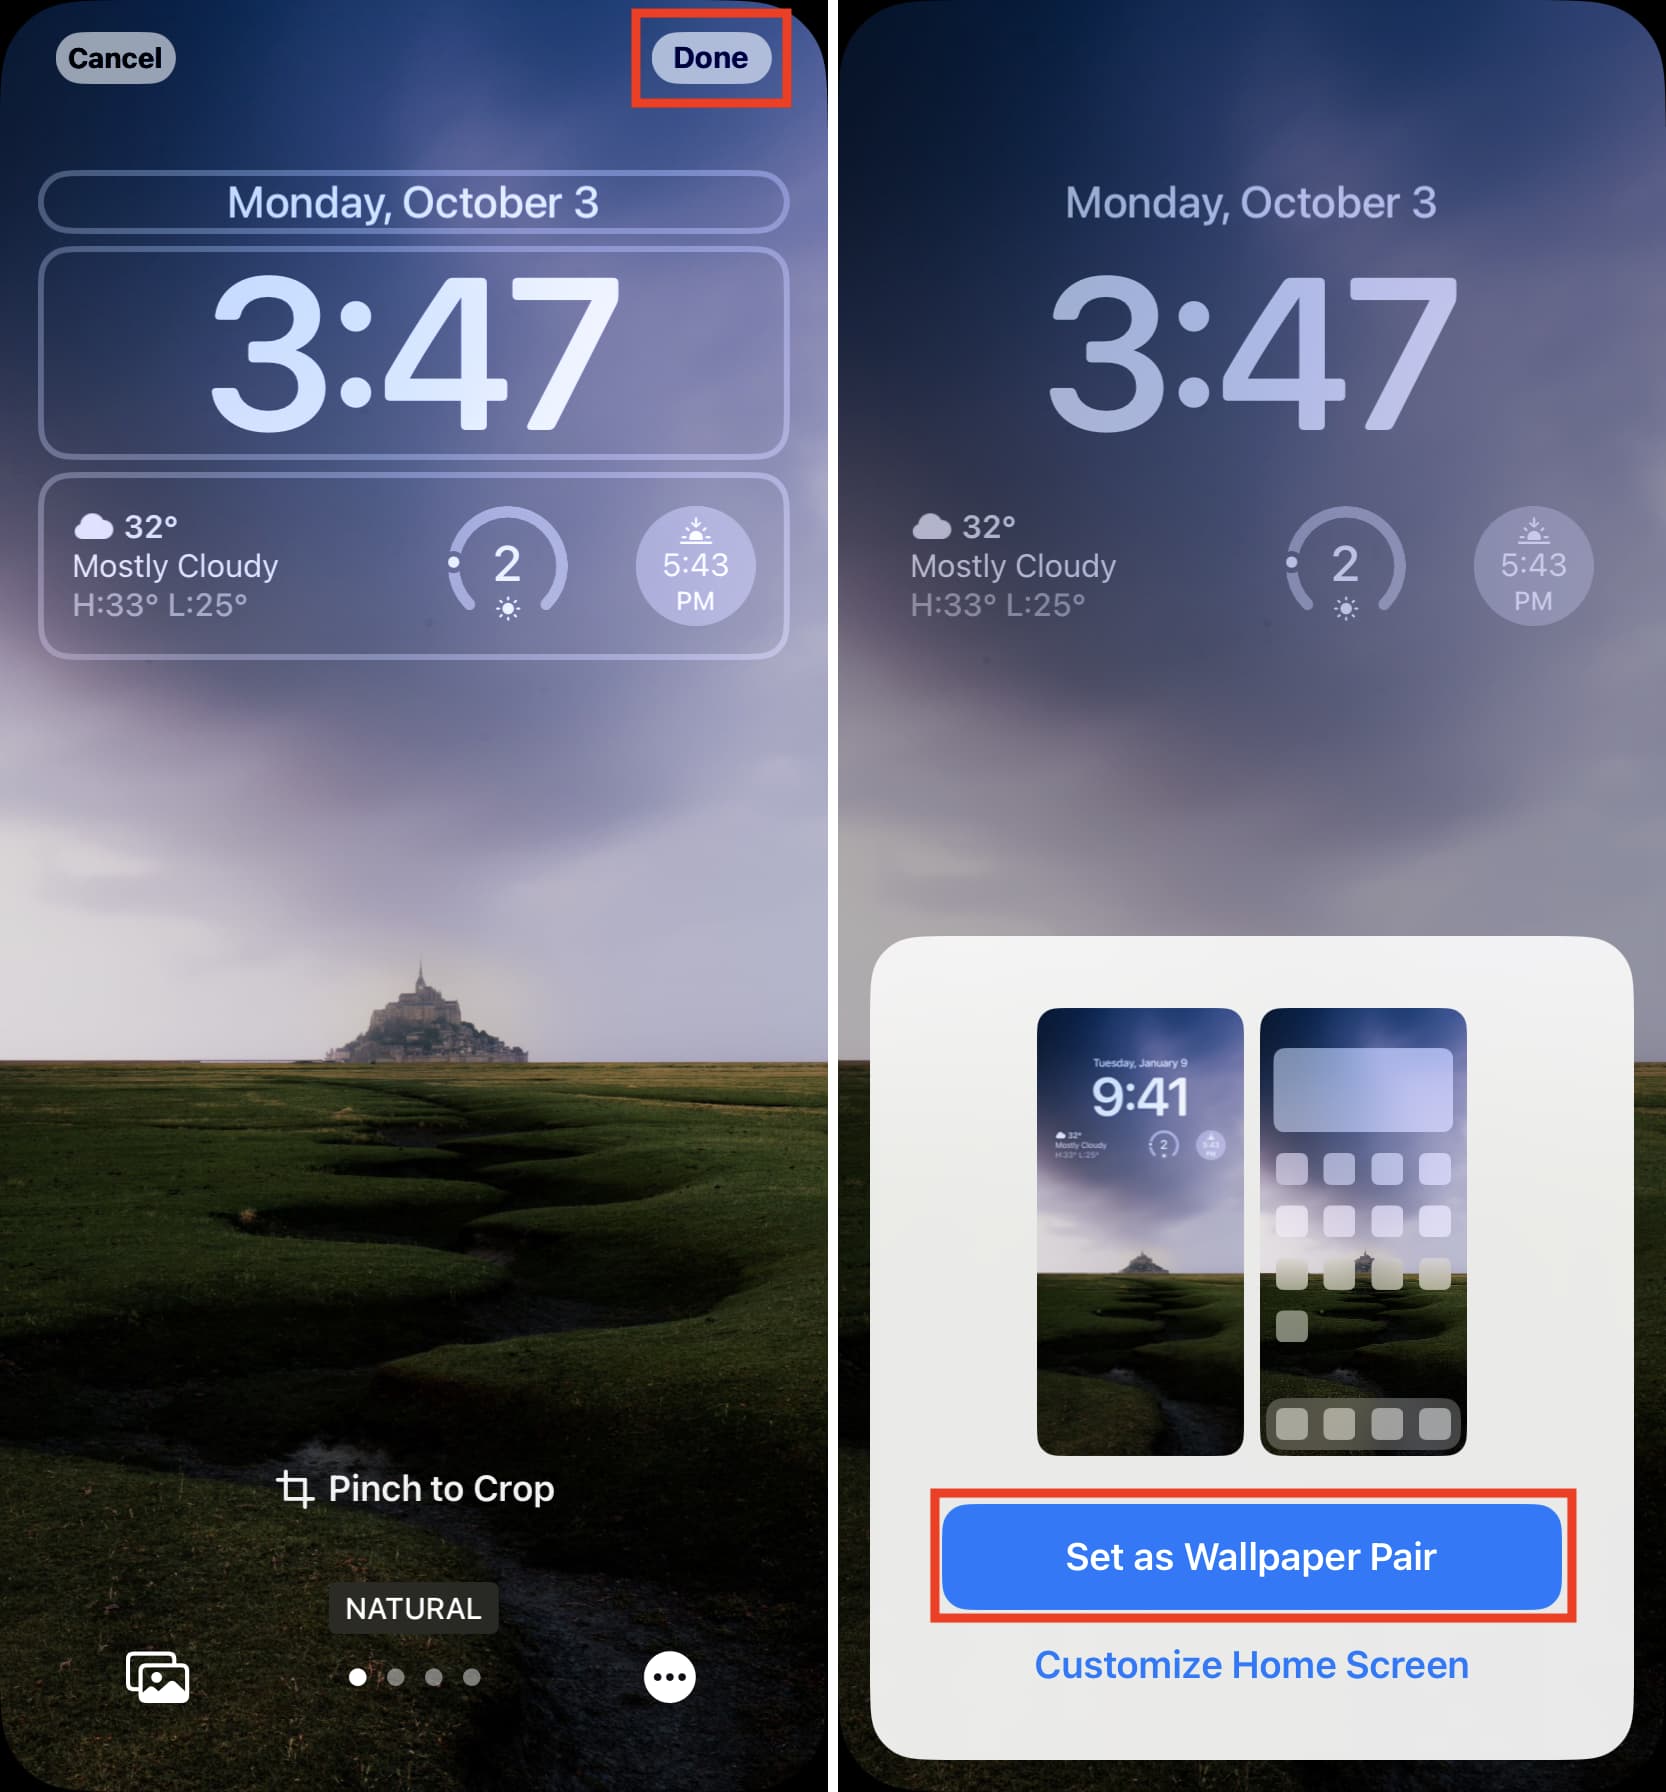 Finish editing iPhone Lock Screen with weather conditions